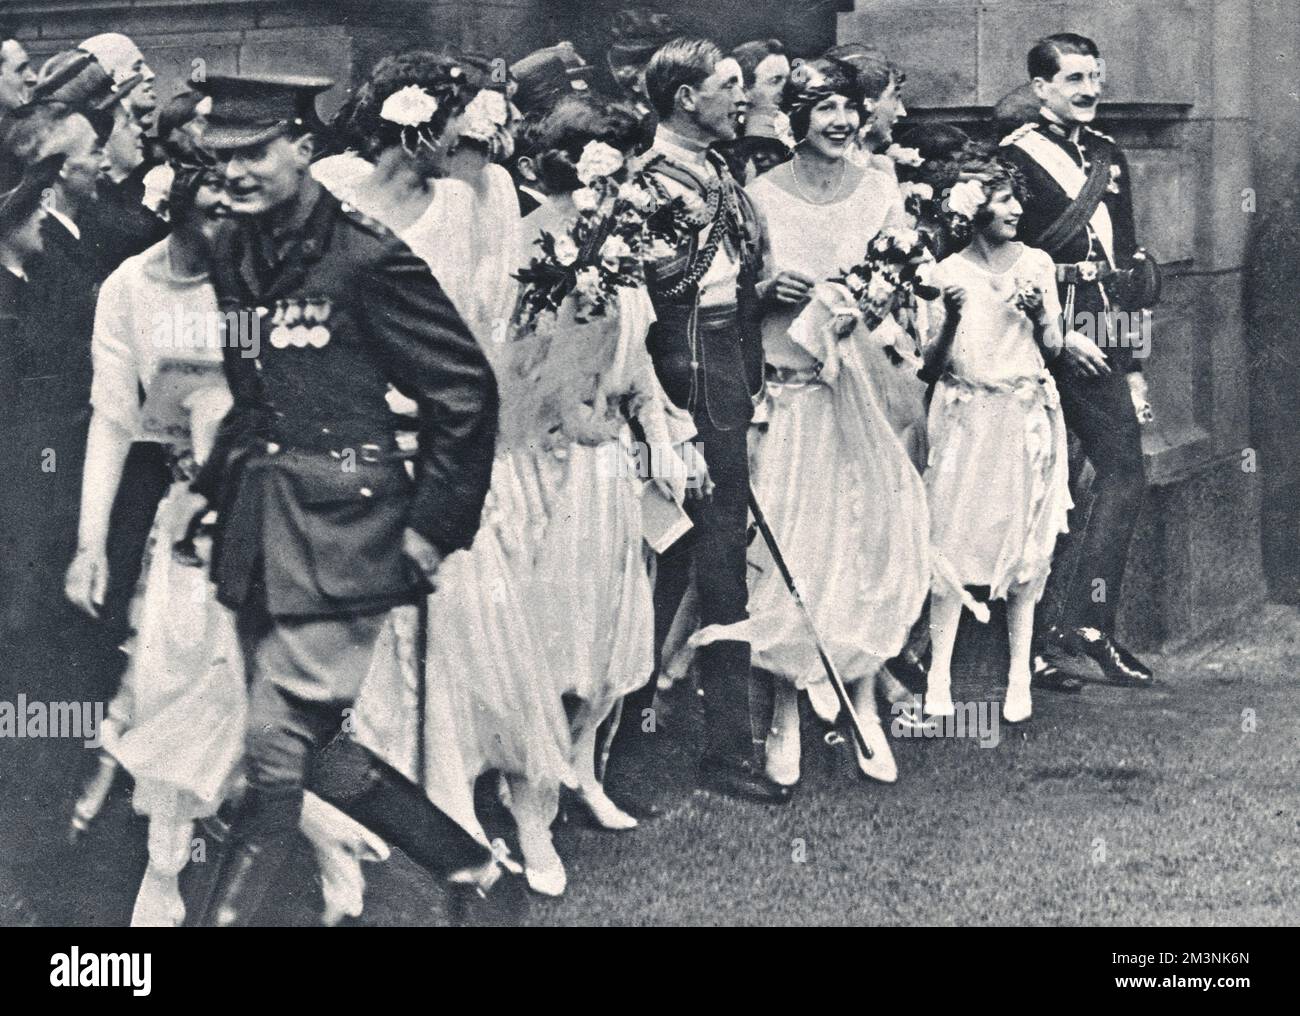 A group of wedding guests line up to bombard the newlywed Duke and Duchess of York with rose leaves as they depart for their honeymoon from Buckingham Palace courtyard for their honeymoon.  The group includes bridesmaids, Lady Katherine Hamilton, The Hon. Cecilia Bowes-Lyon and the Hon. Diamond Hardinge.     Date: 1923 Stock Photo